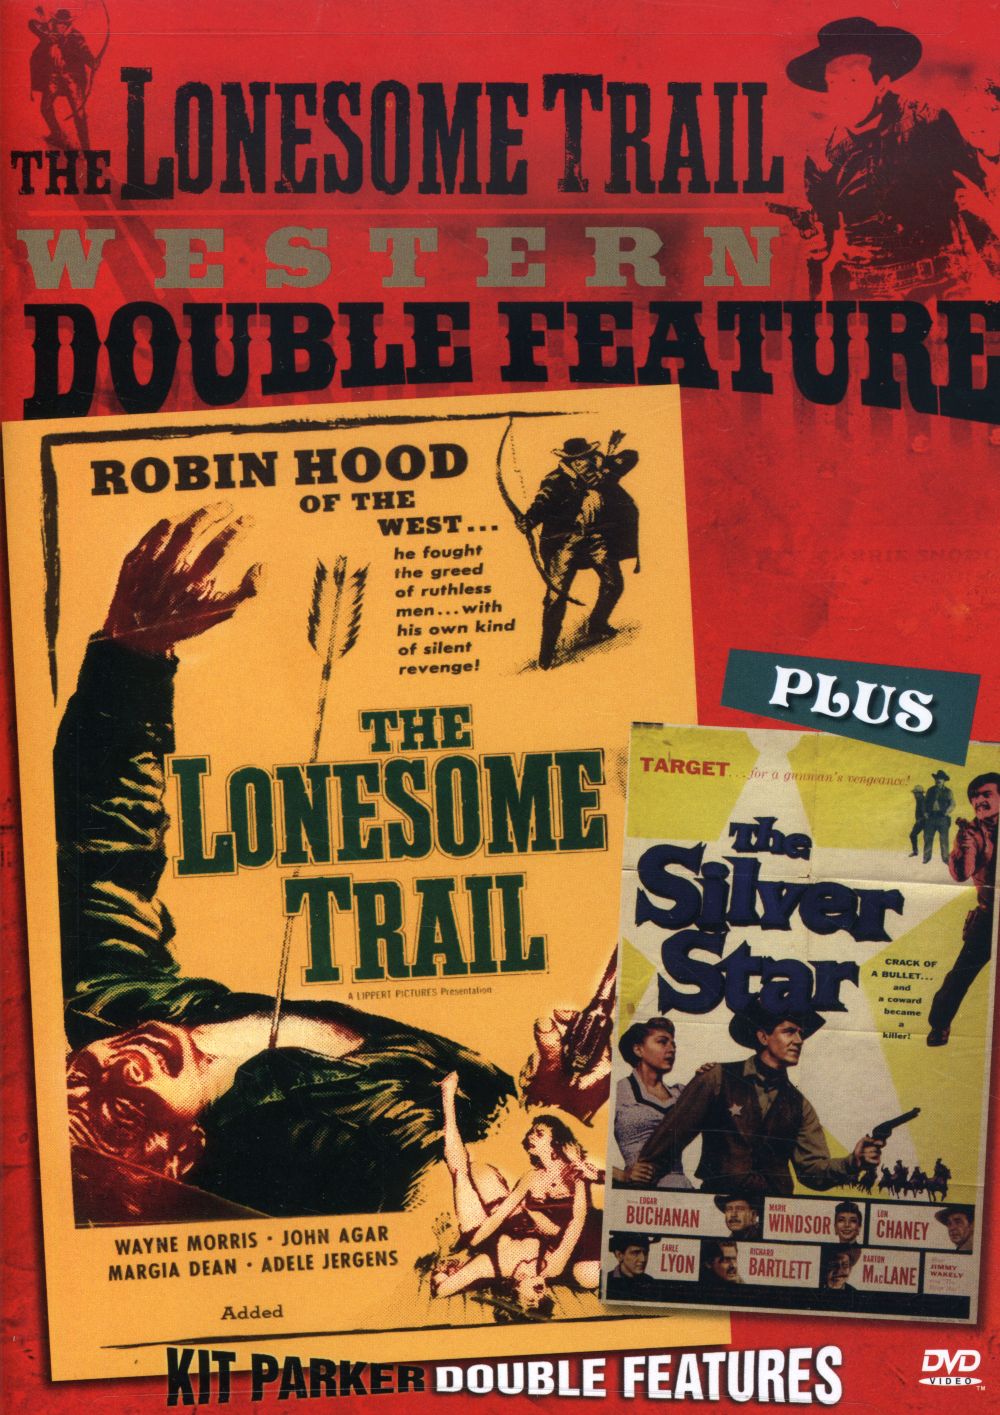 WESTERN DOUBLE FEATURE: LONESOME TRAIL & SILVER